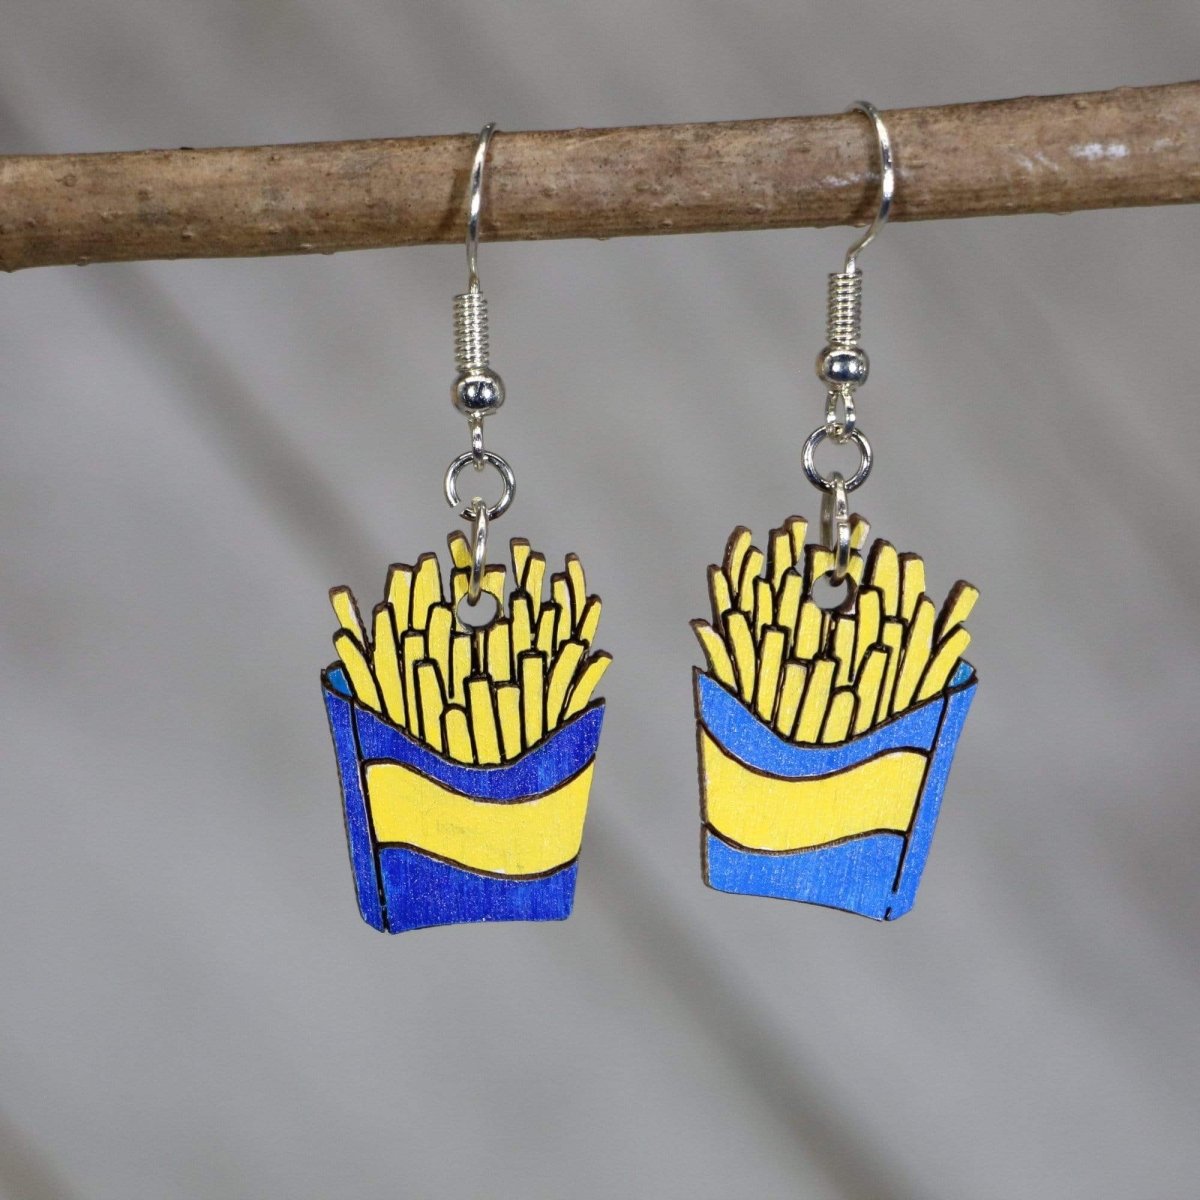 French Fry Wooden Dangle Earrings - Blue and Yellow - Cate's Concepts, LLC